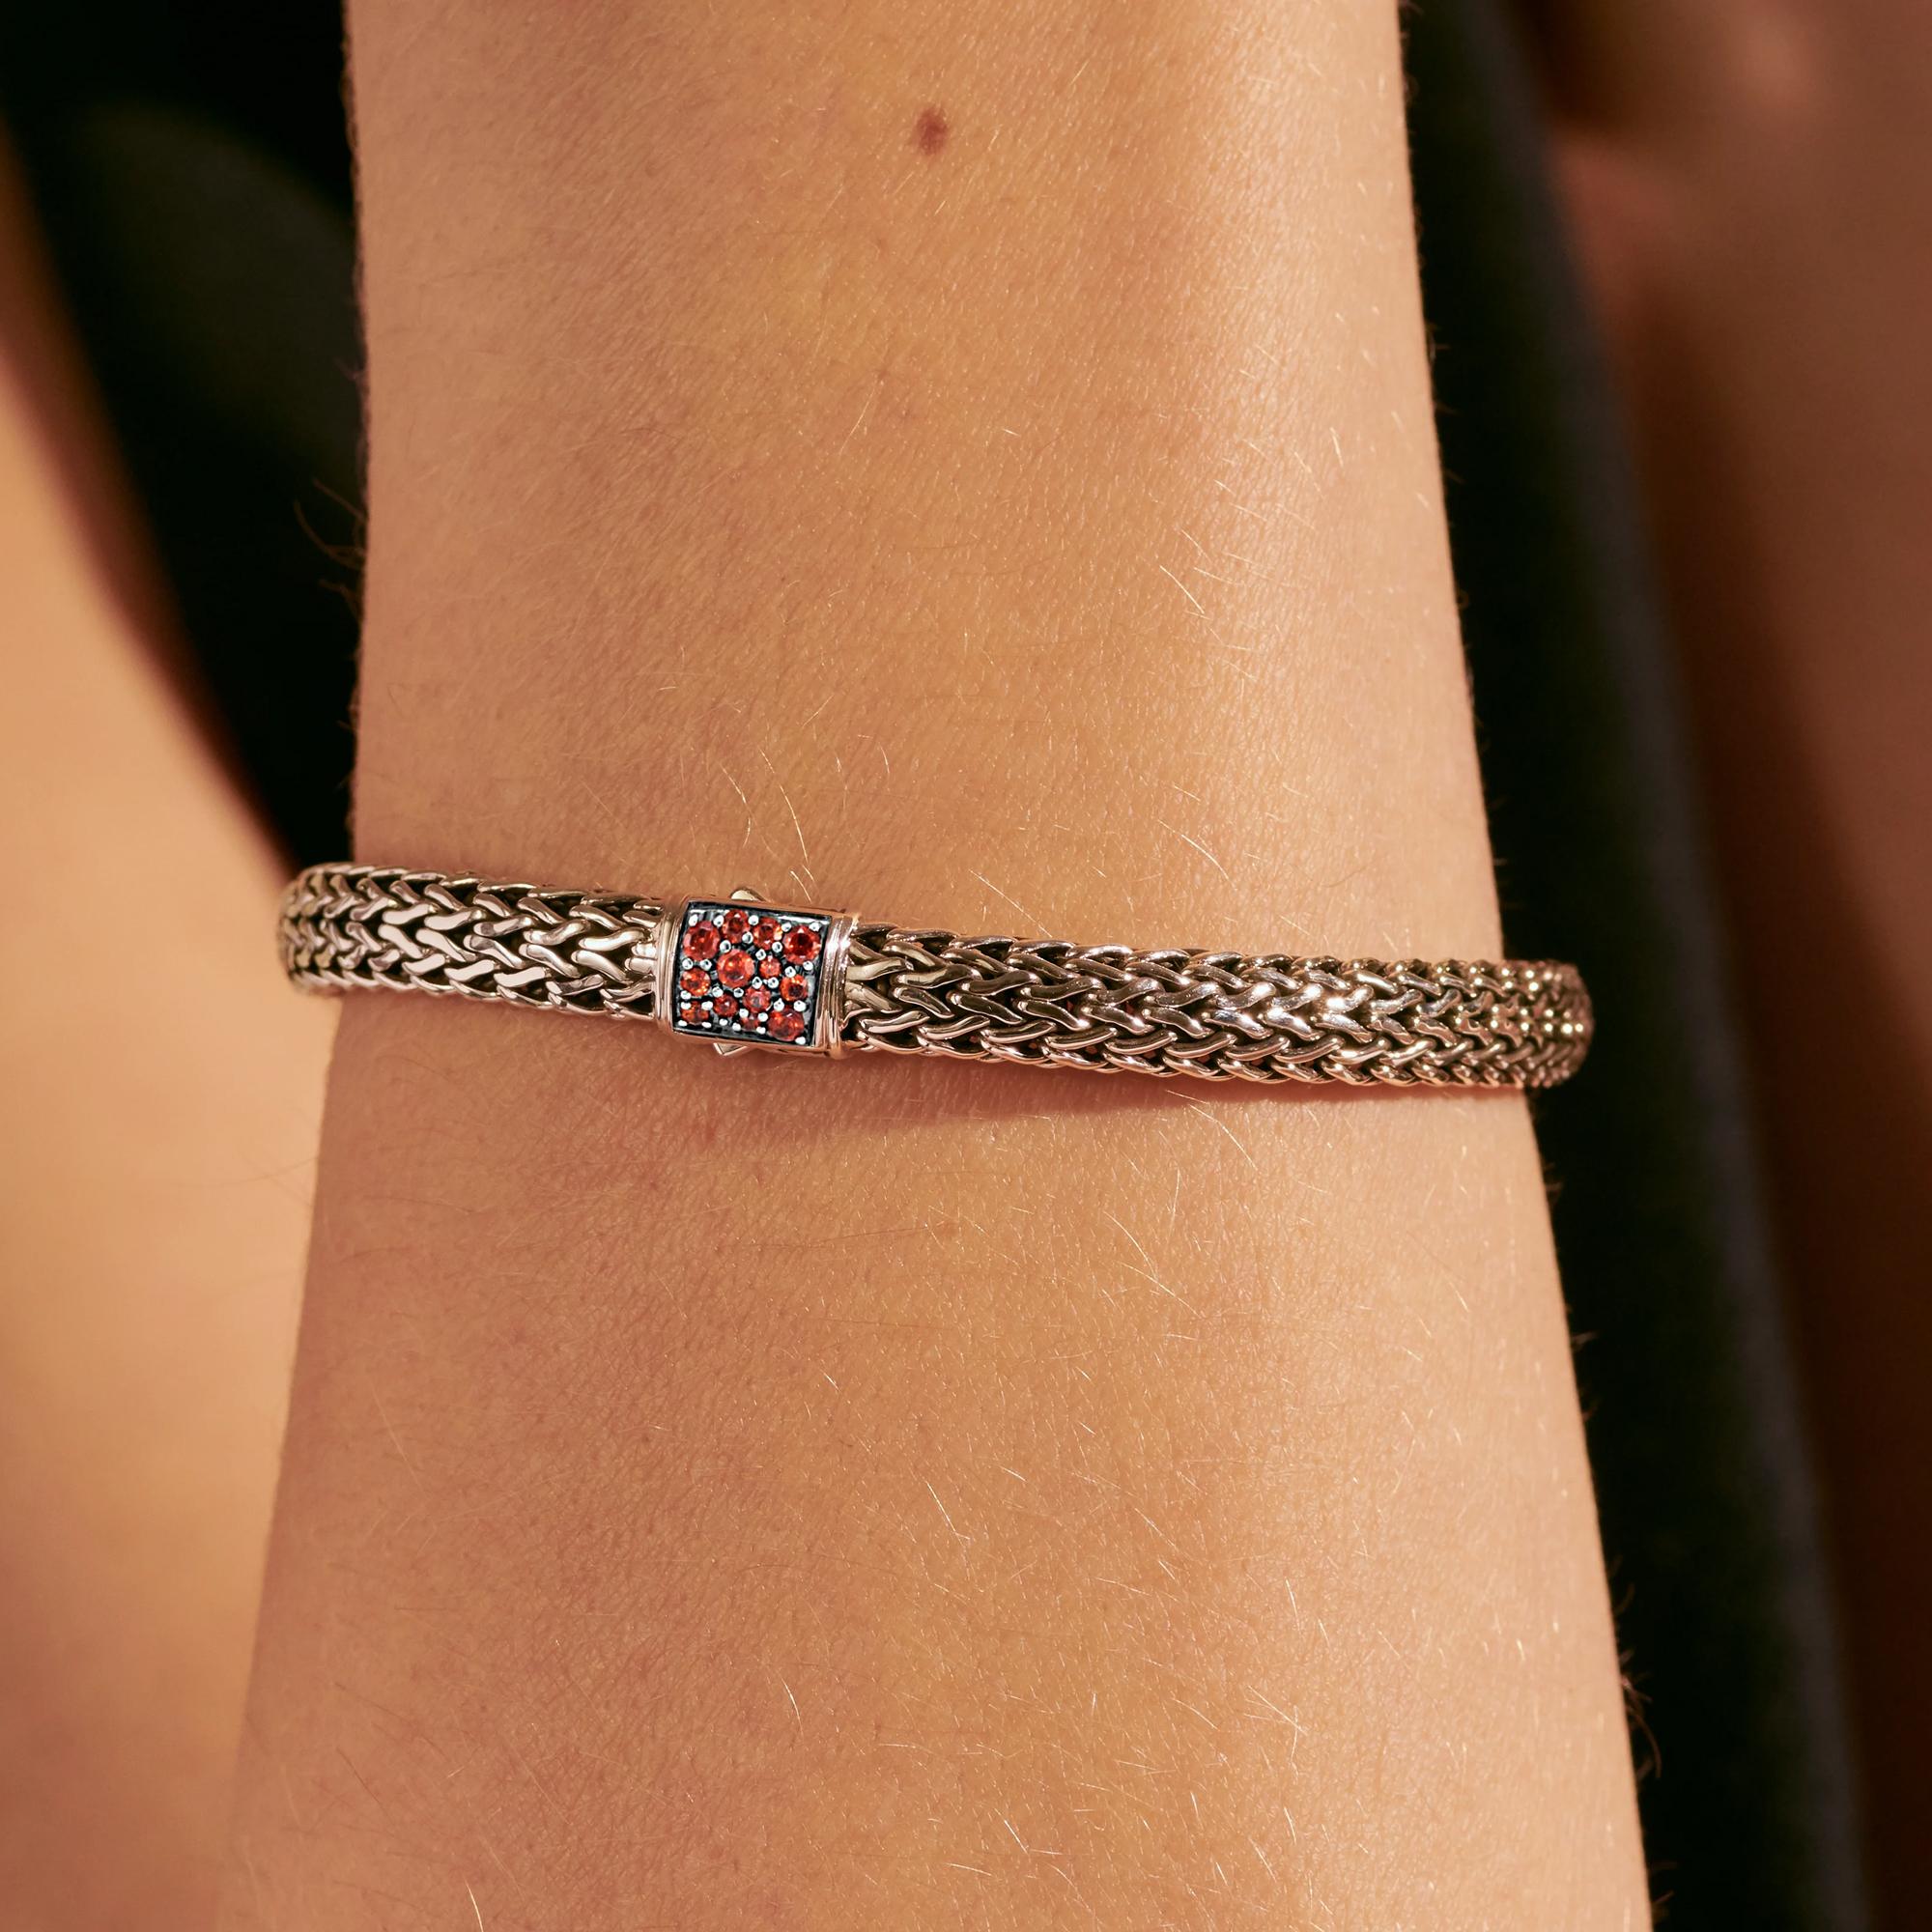 Taking 9 hours to cast, weave & finish by hand, our most iconic design distills the complex art of chain-weaving into a stunningly simple form.

The bracelet measures 7 1/4